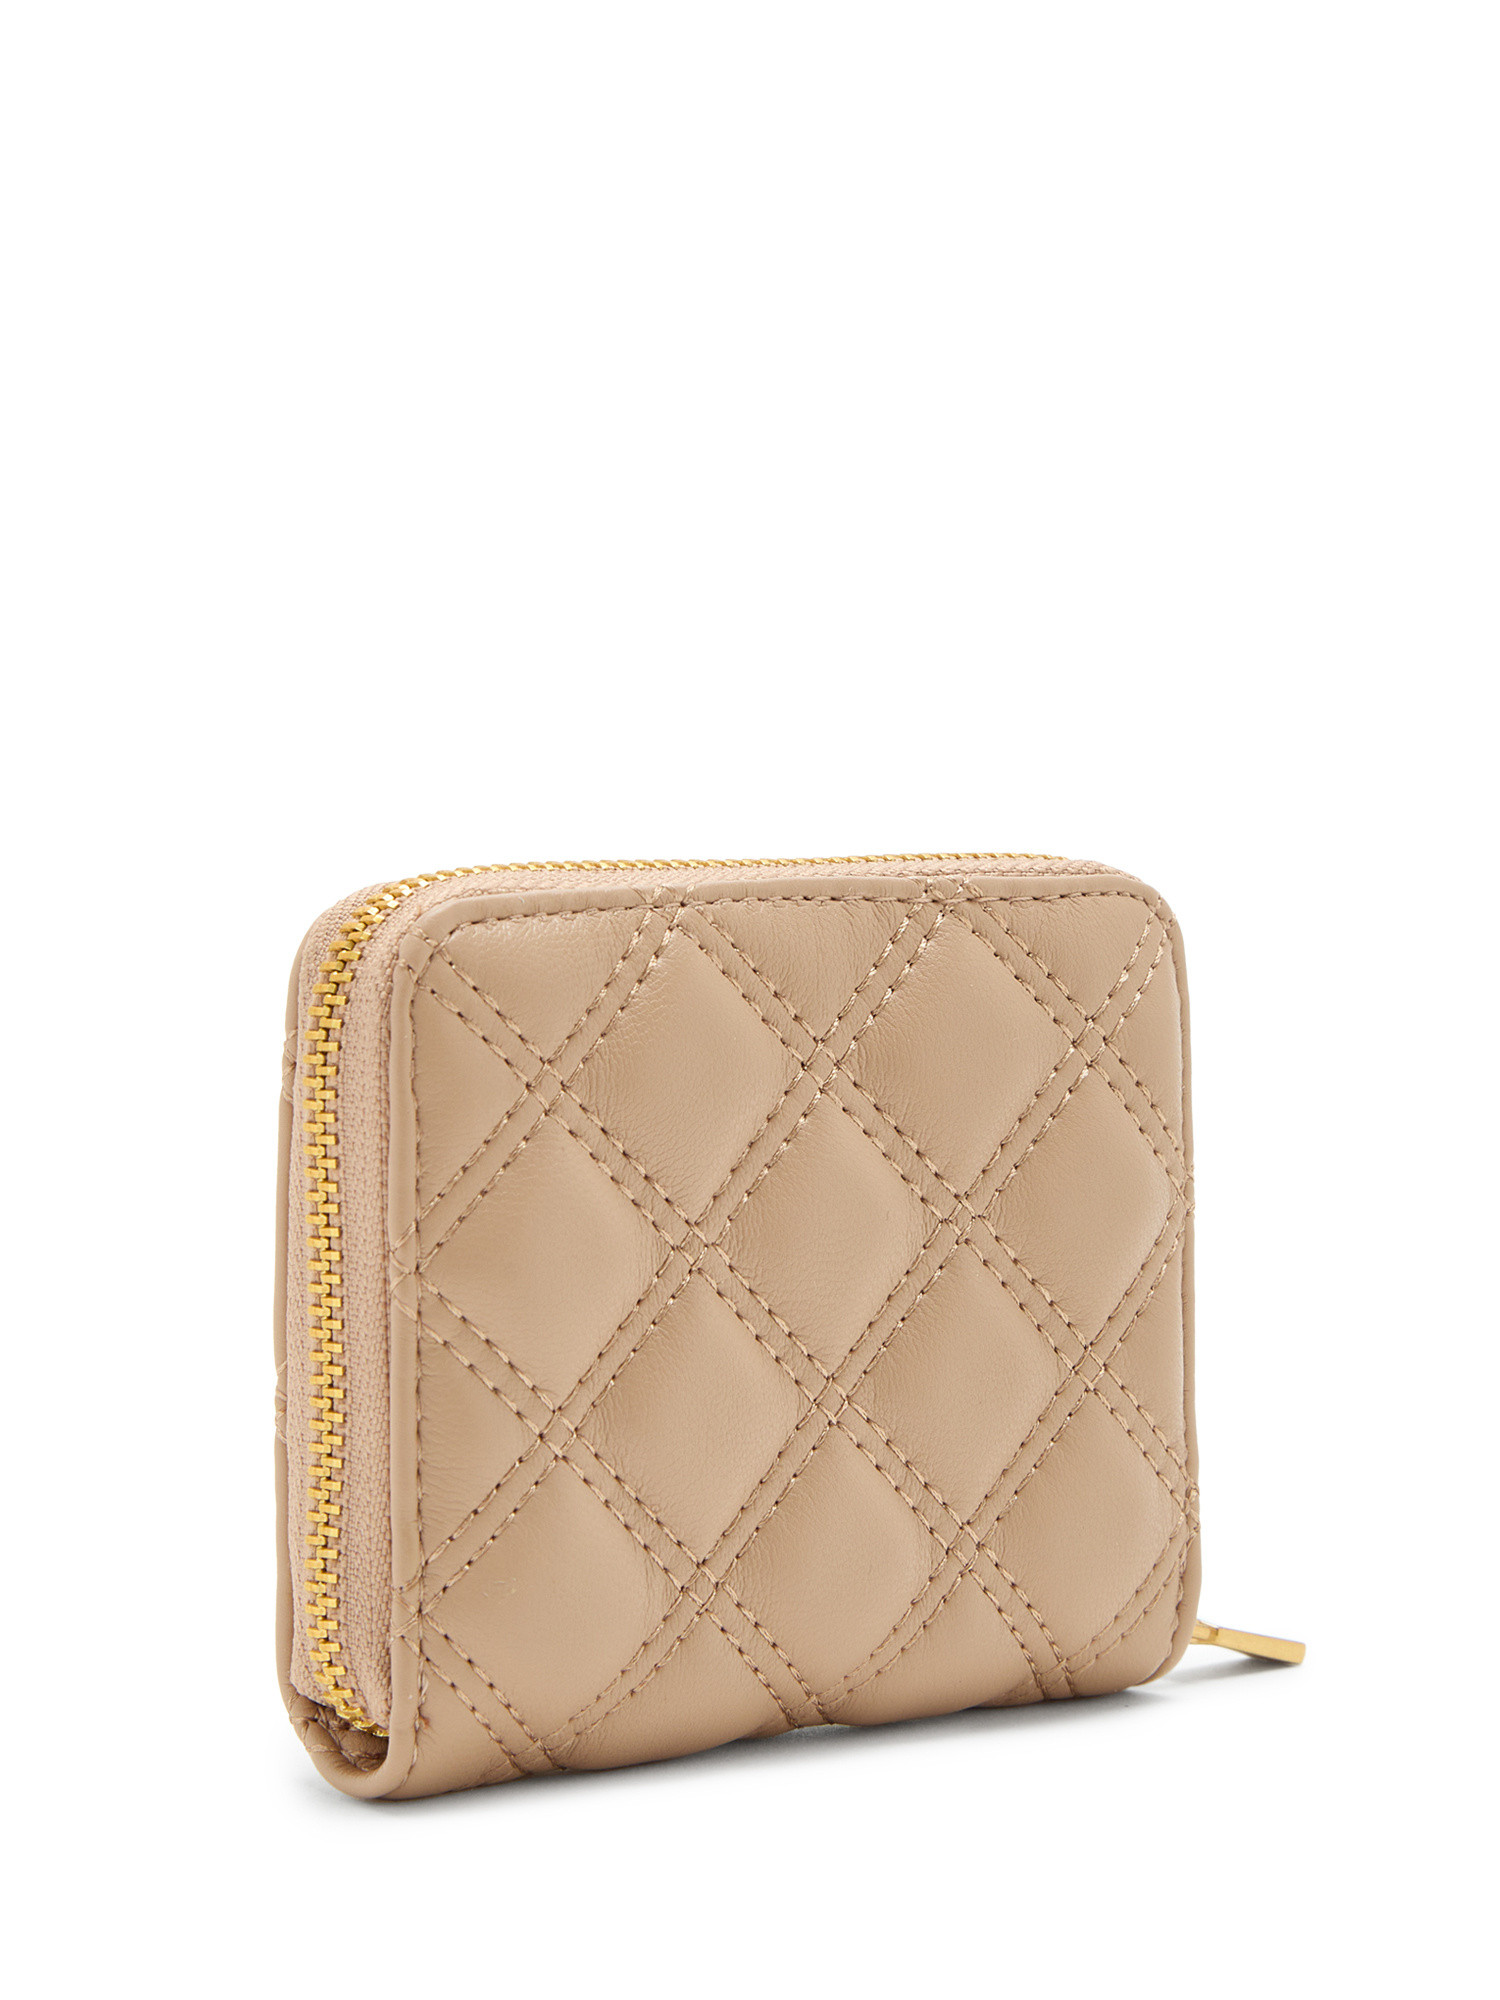 Guess - Giully quilted mini wallet, Beige, large image number 1